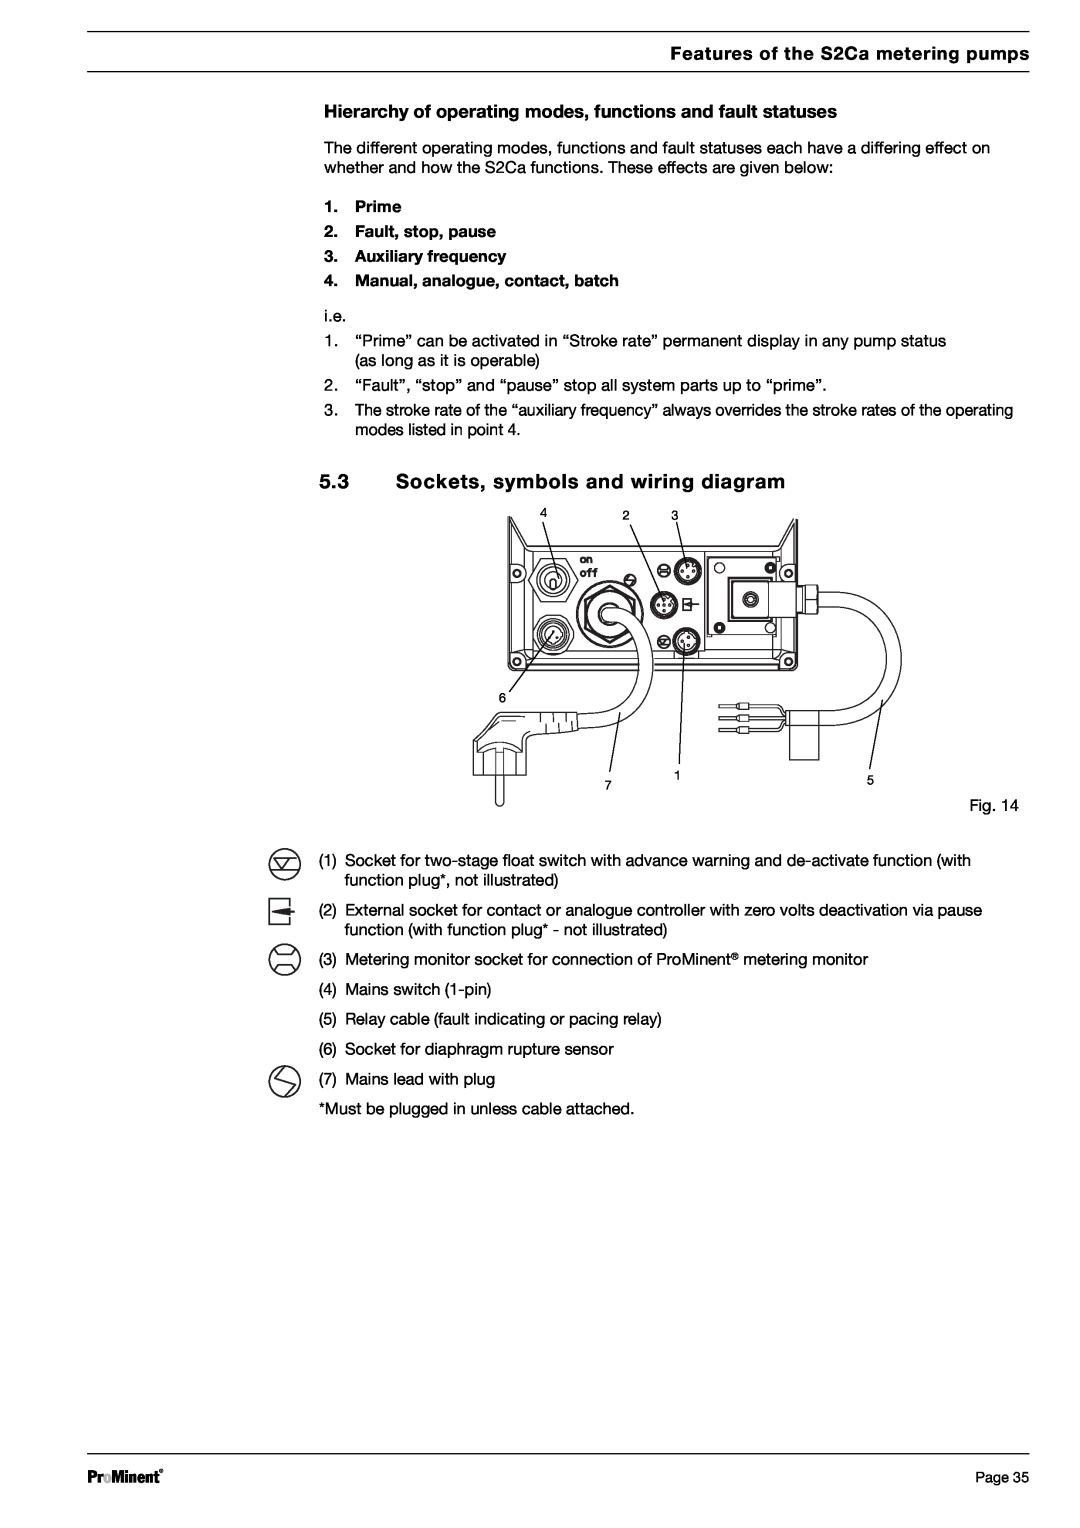 Sigma 5.3Sockets, symbols and wiring diagram, Dulcodes UV-Desinfektionsanlage, Features of the S2Ca metering pumps 